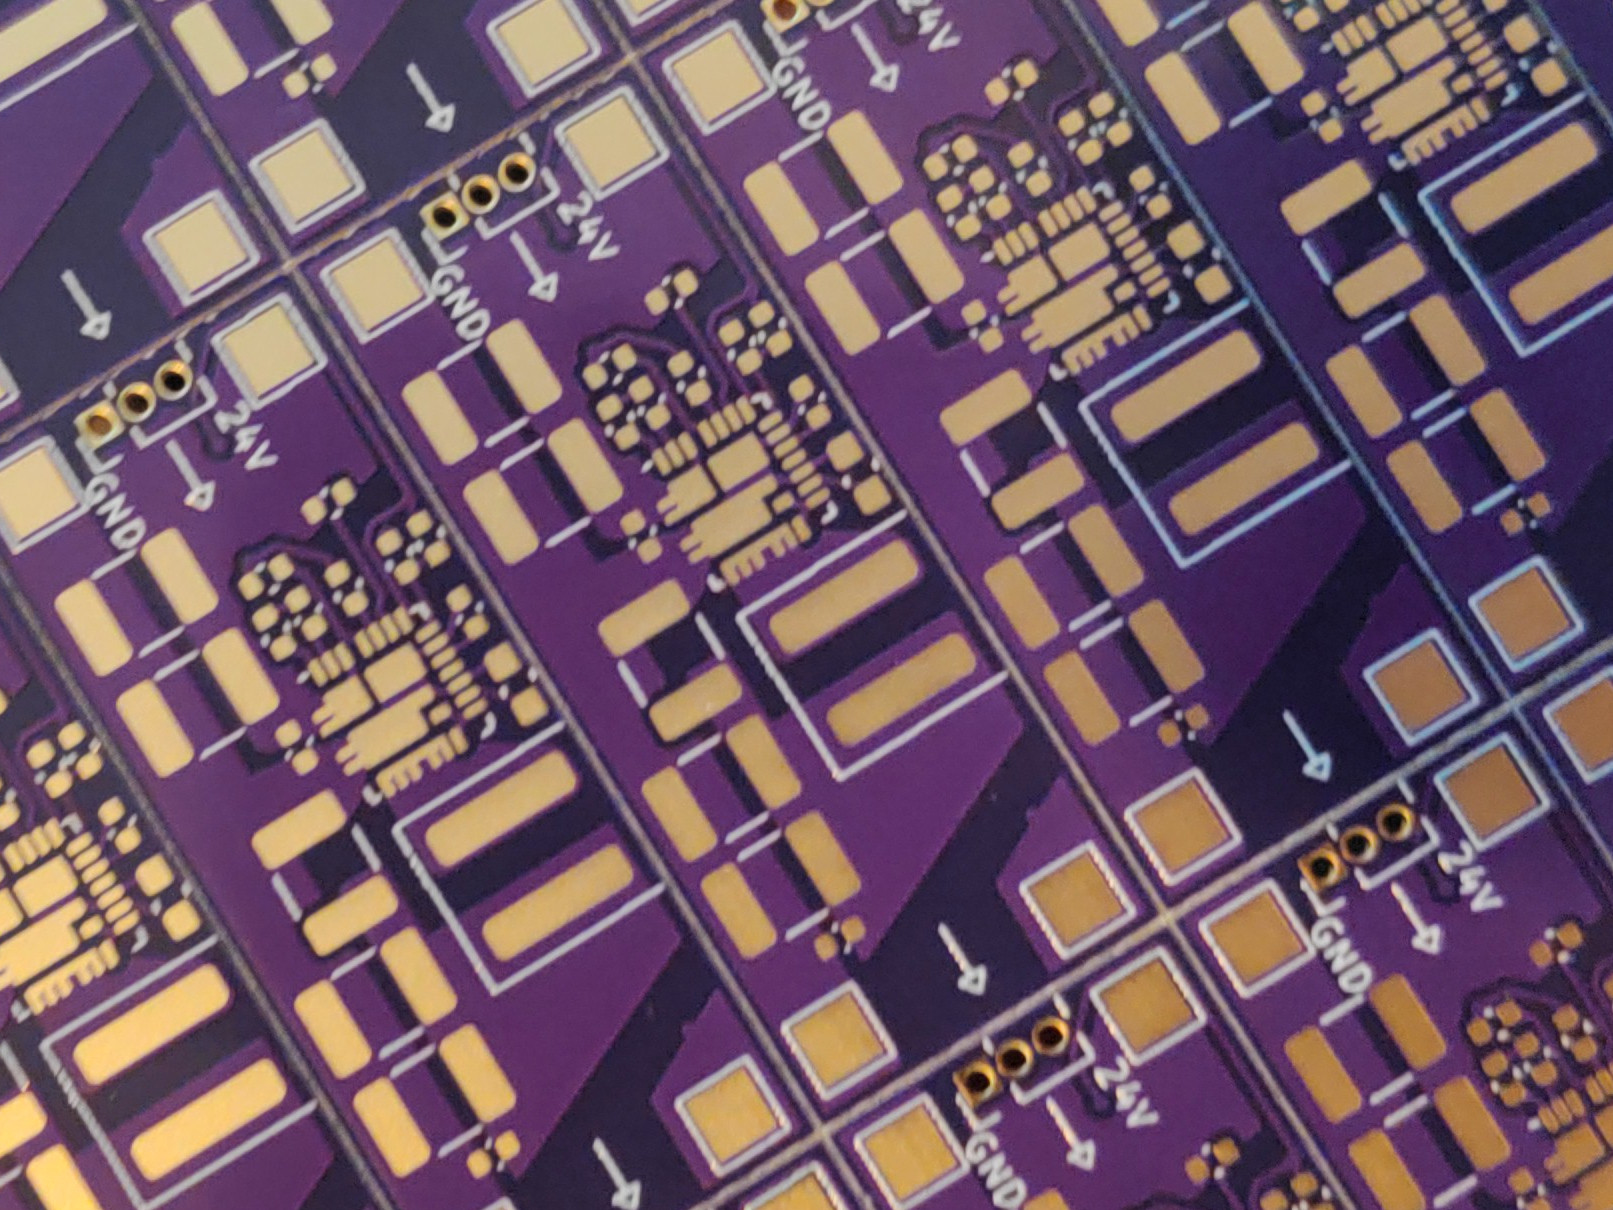 unpopulated PCBs in a panel